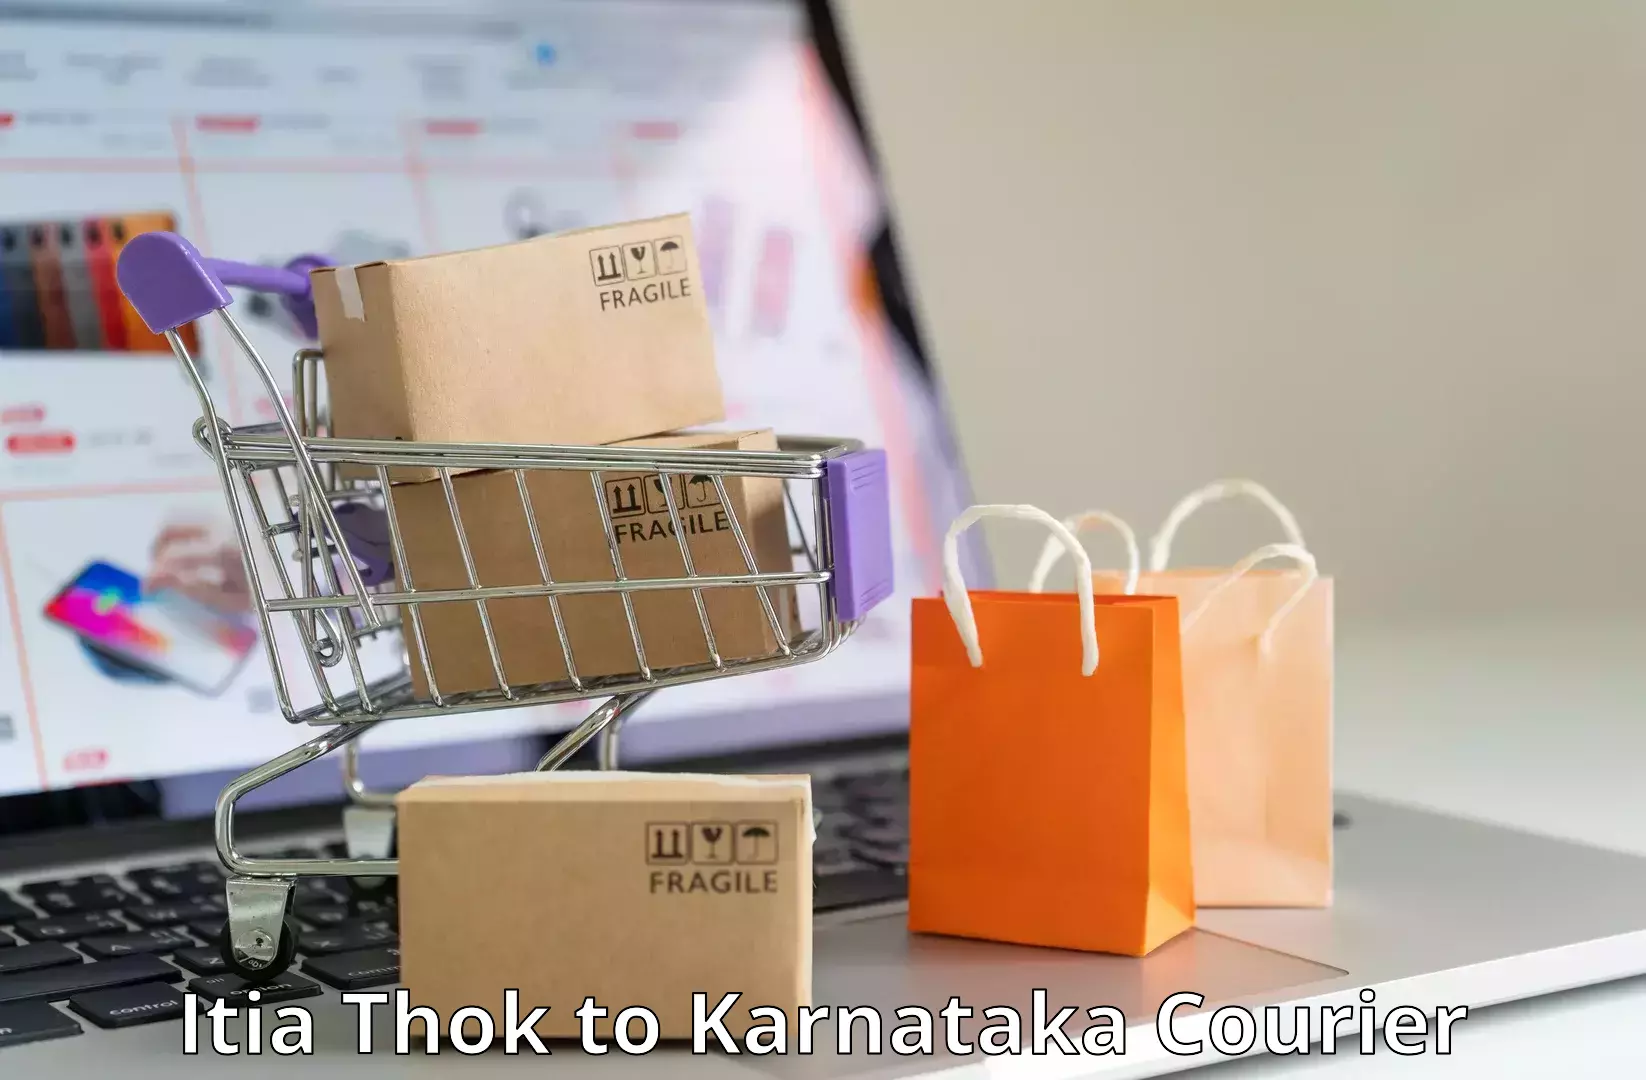 Specialized courier services Itia Thok to Mulbagal